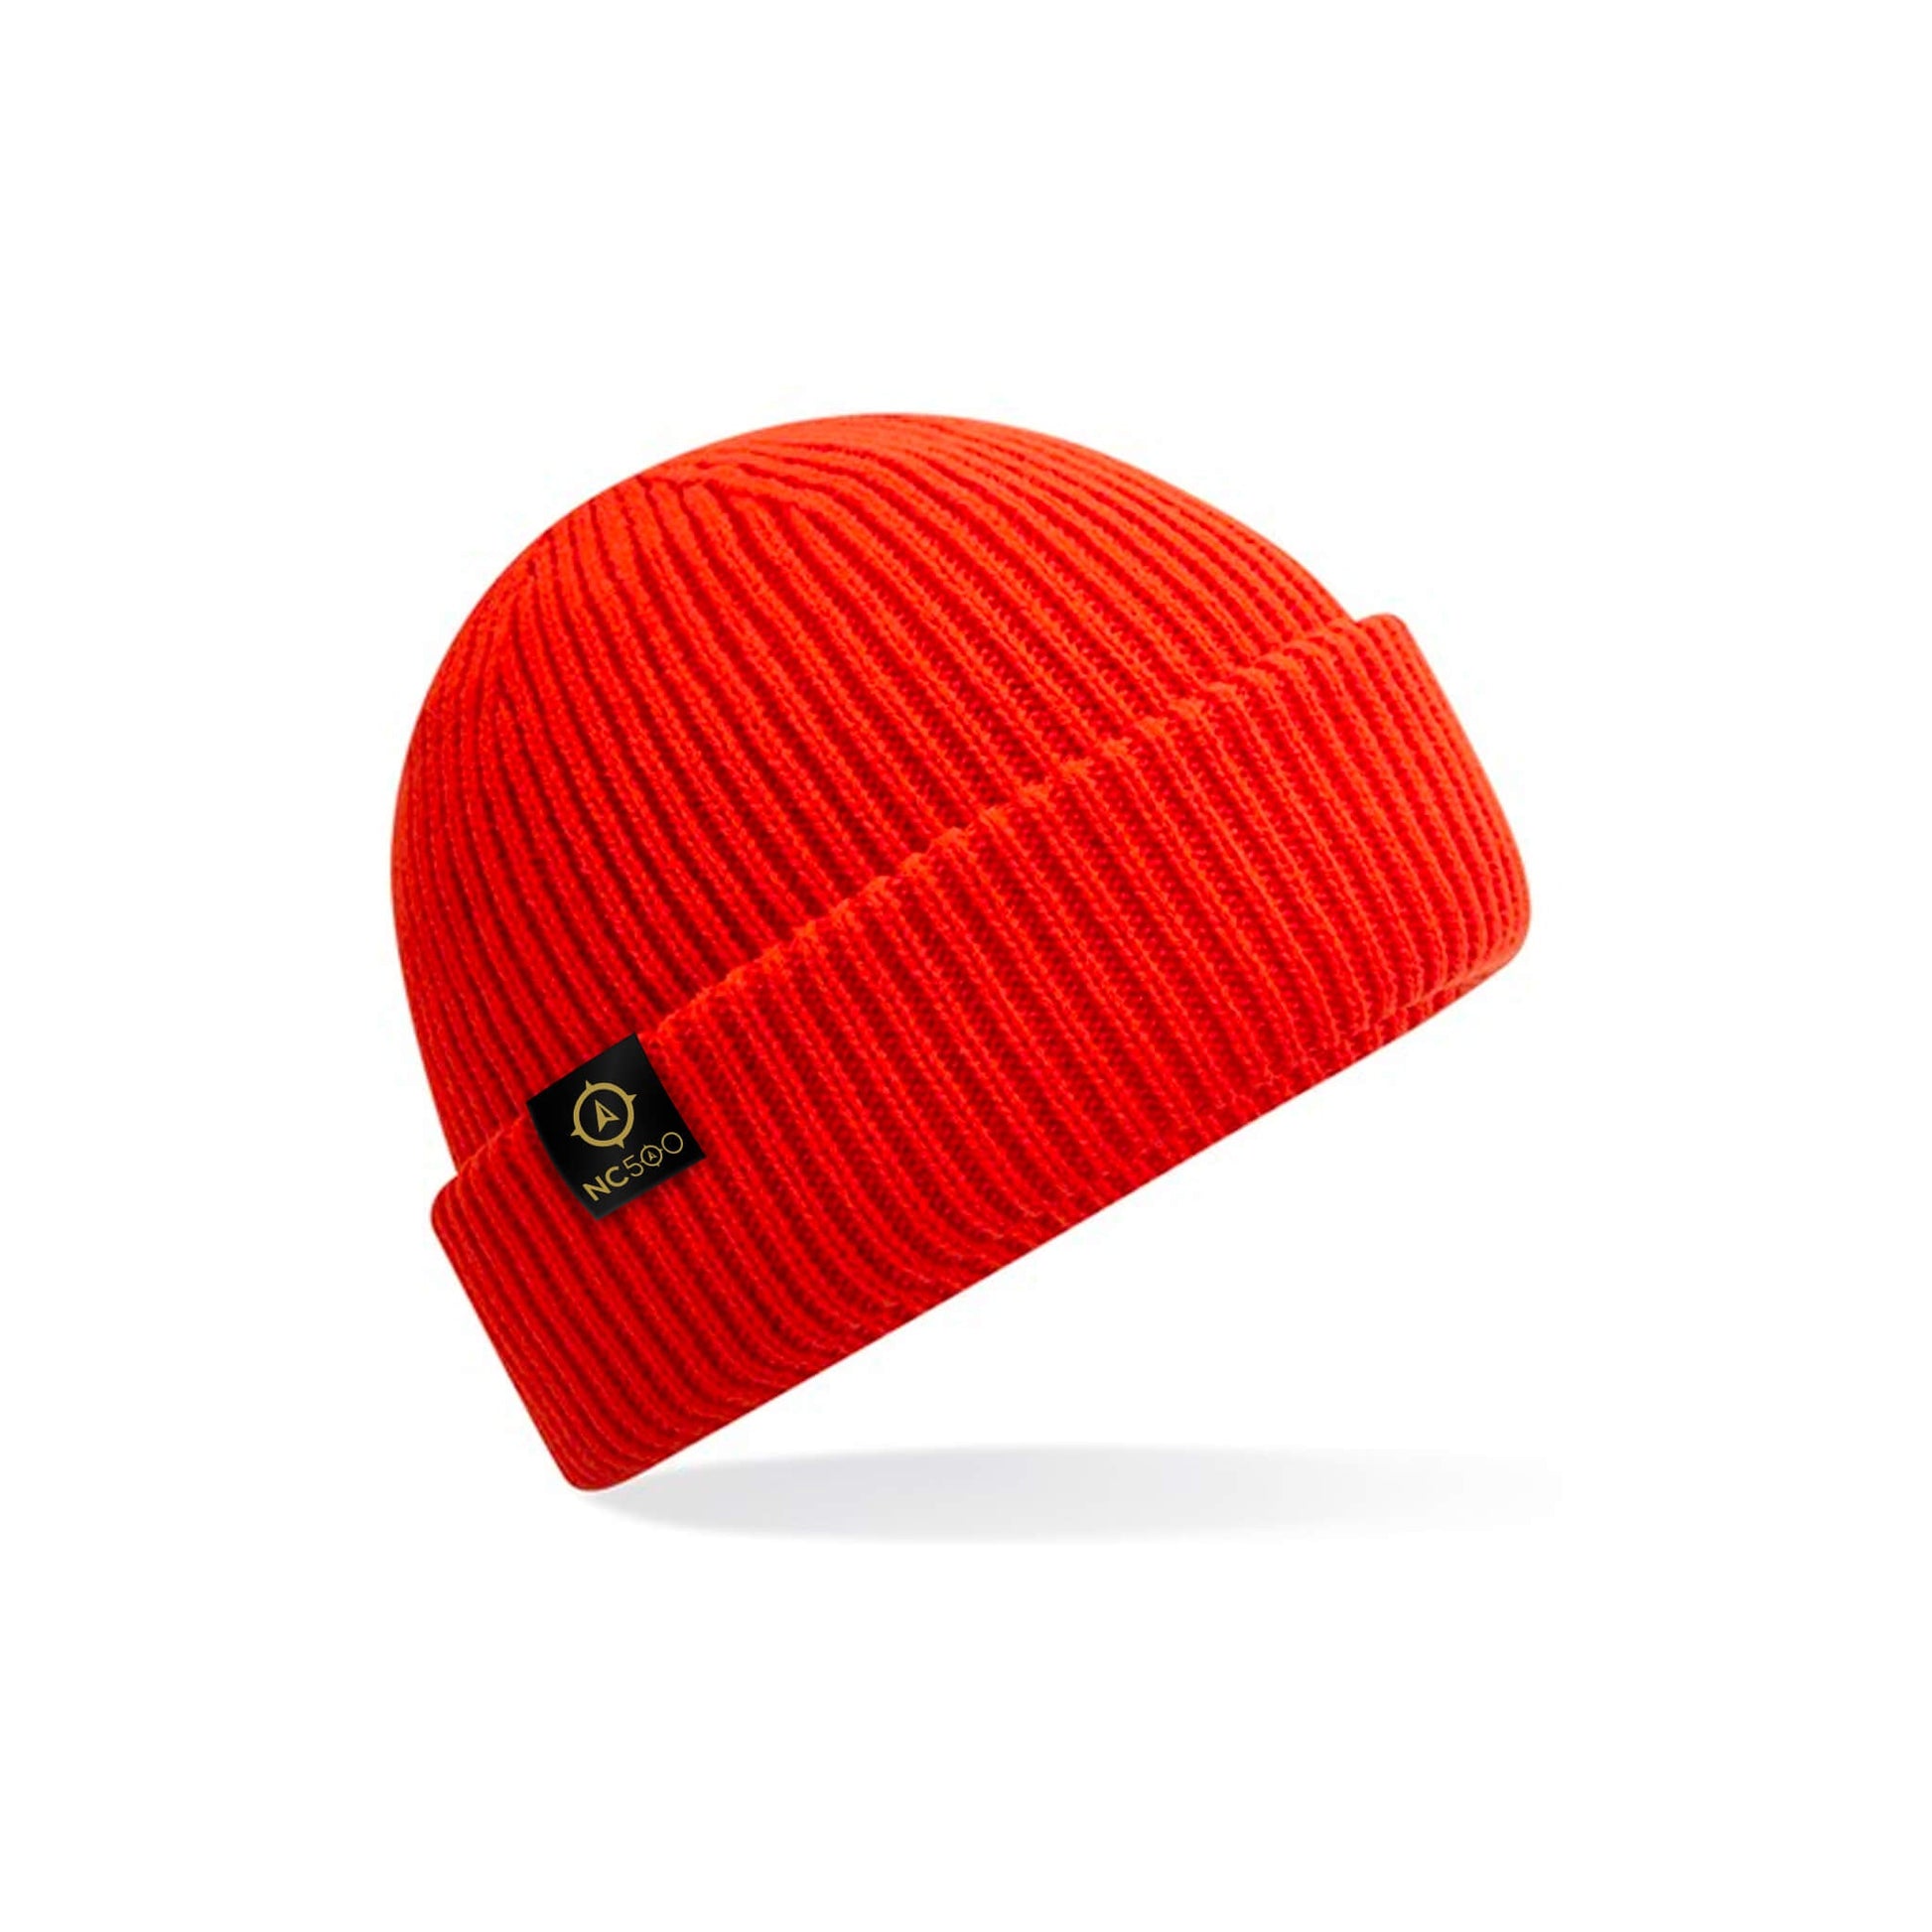 Wind Resistant Beanie | Fire Red | North Coast 500